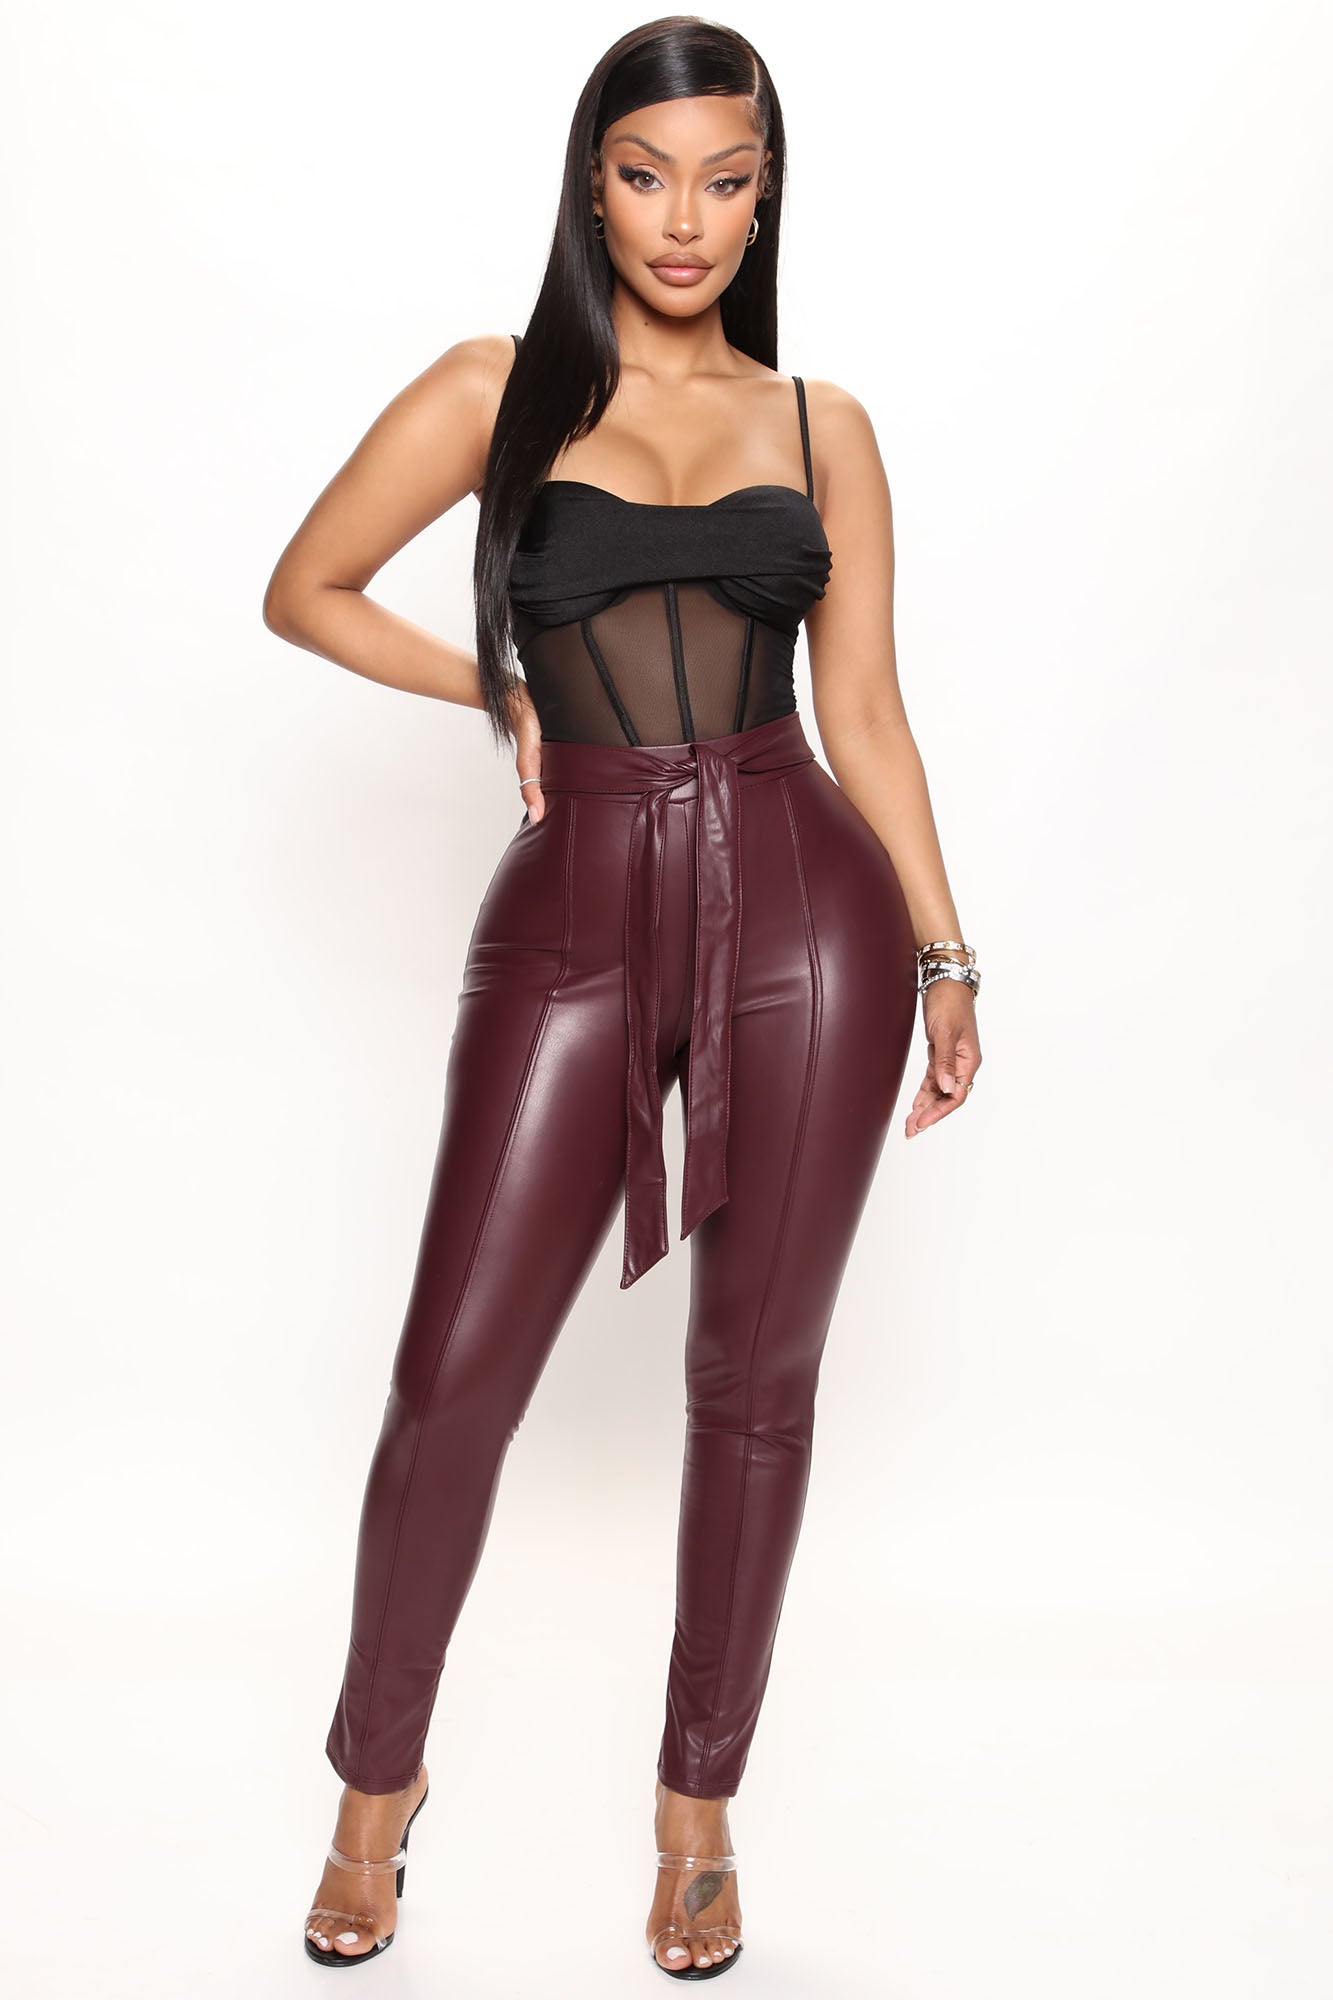 Discover 80+ wine leather pants super hot